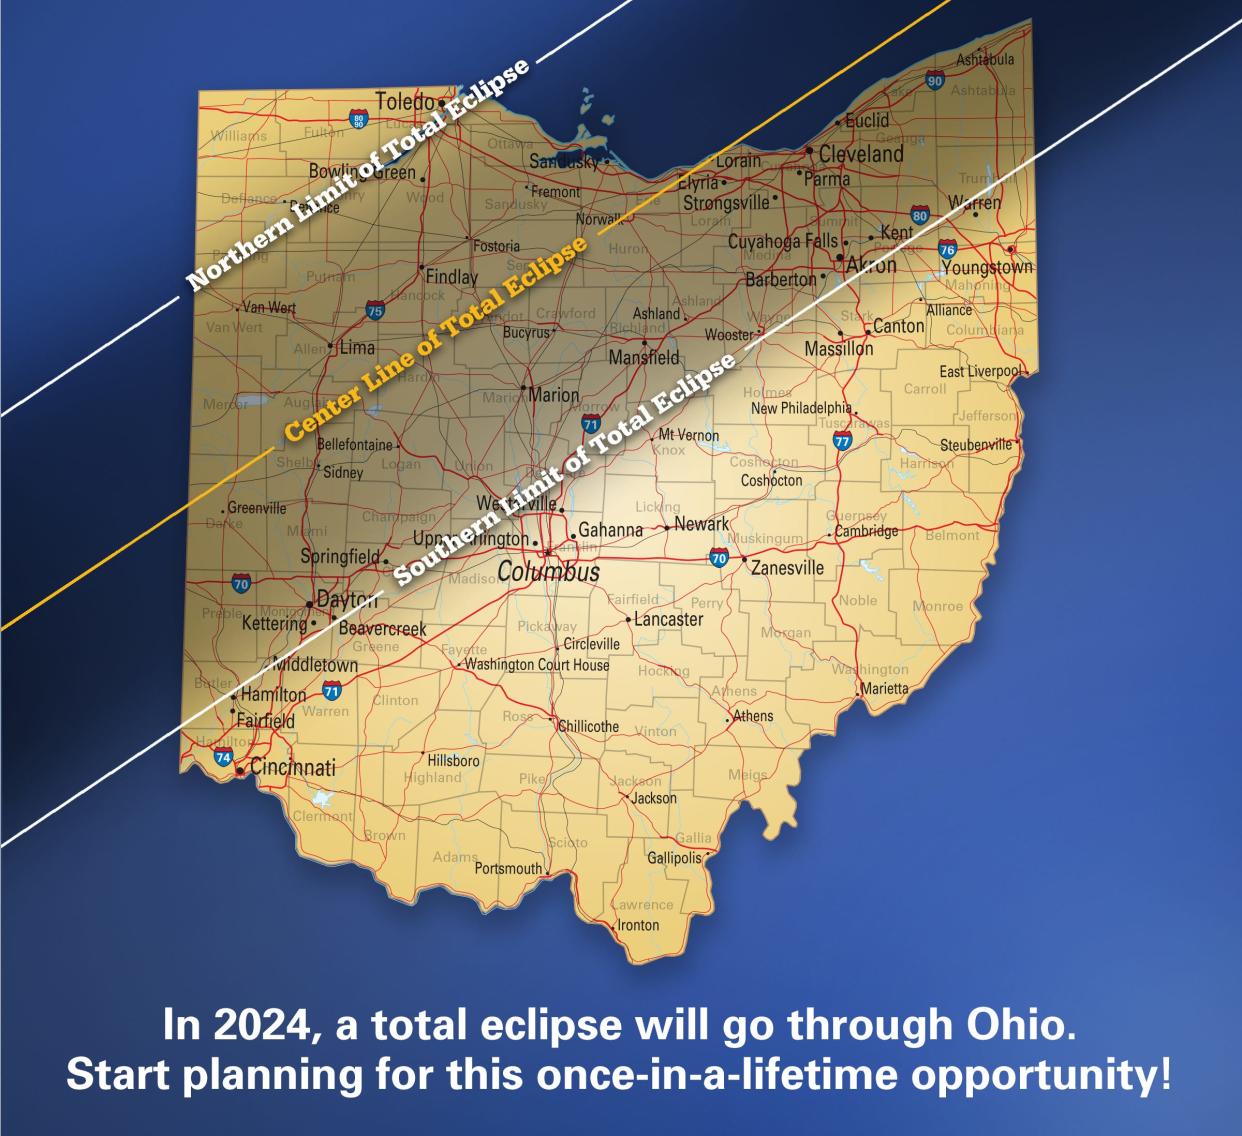 We asked Ohio astronomy experts what they're doing for the eclipse